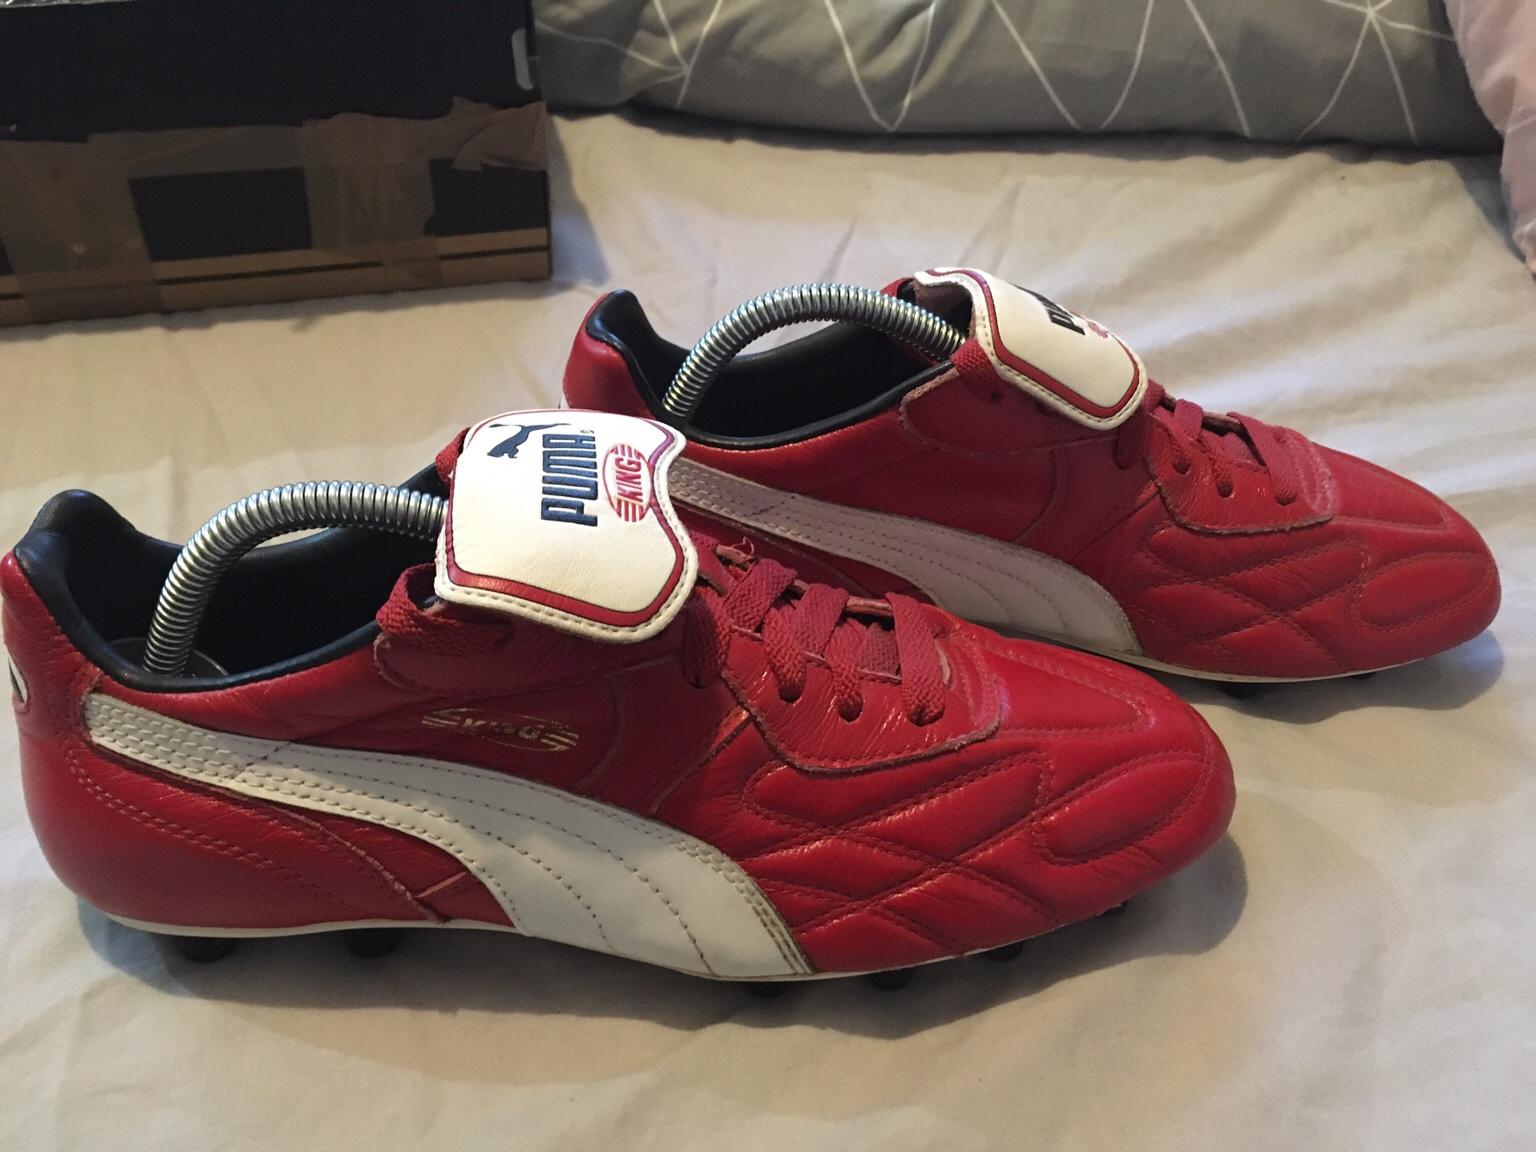 puma king red boots